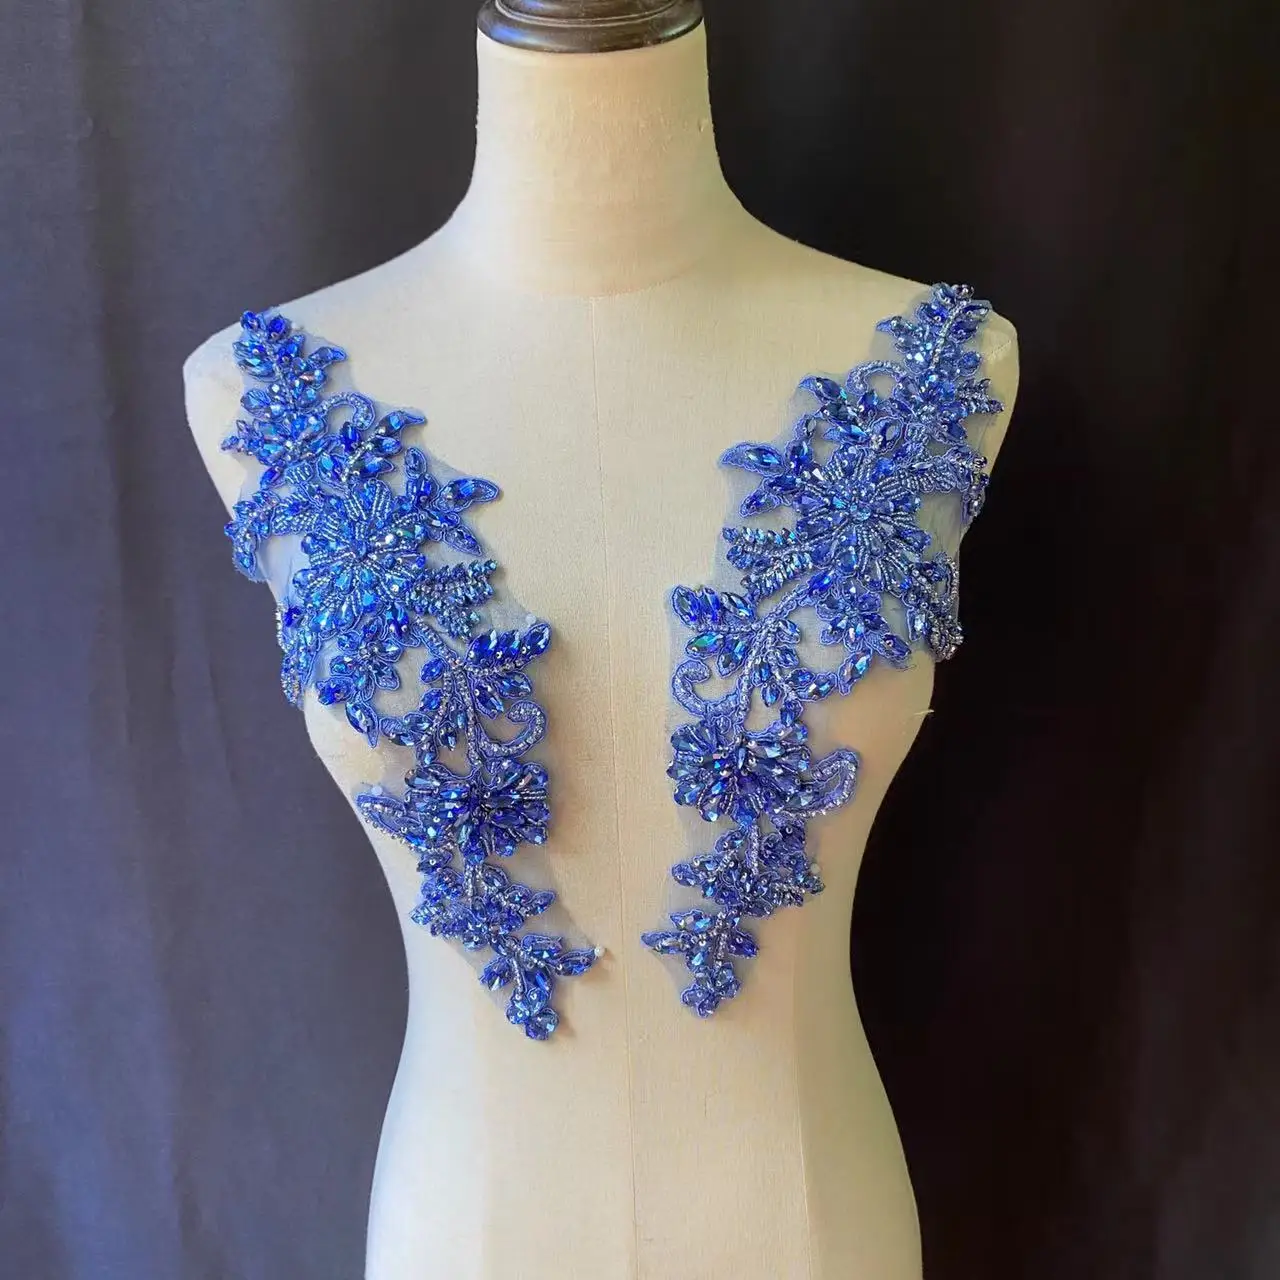 3D Blue Shinning Crystal Bead Applique Rhinestone Patch for Clothing,Coat Sewing,Dance Costume,Diamond Wedding Dress